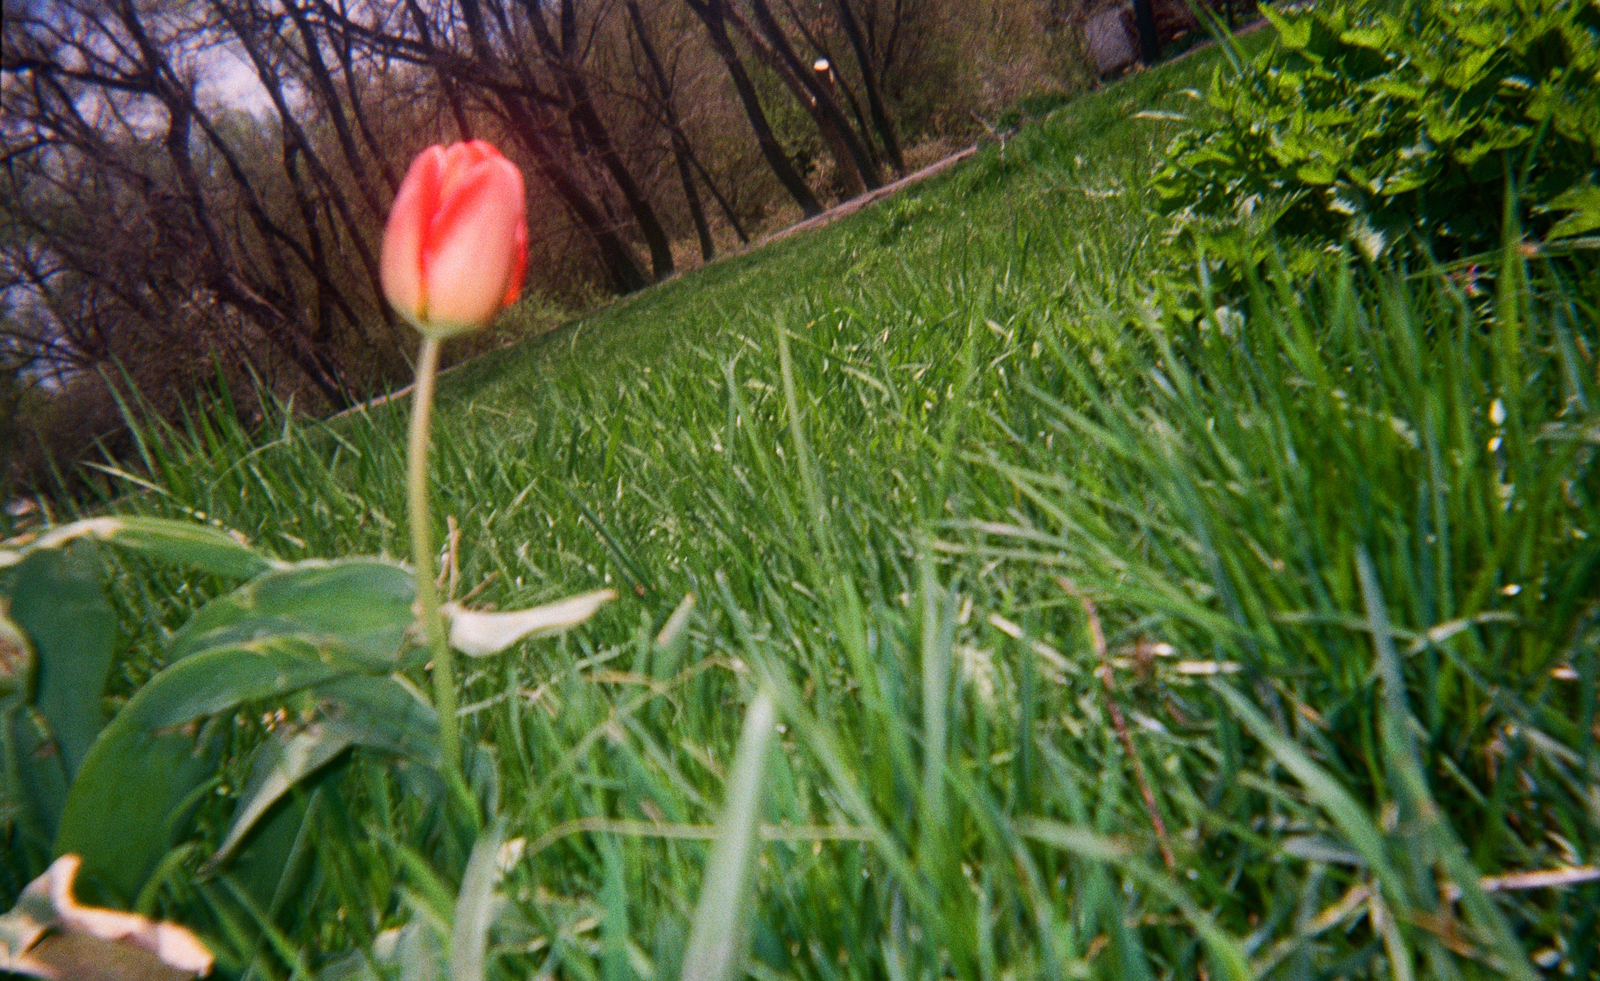 Tulip blooming amid green grass, in photo at wonky angle